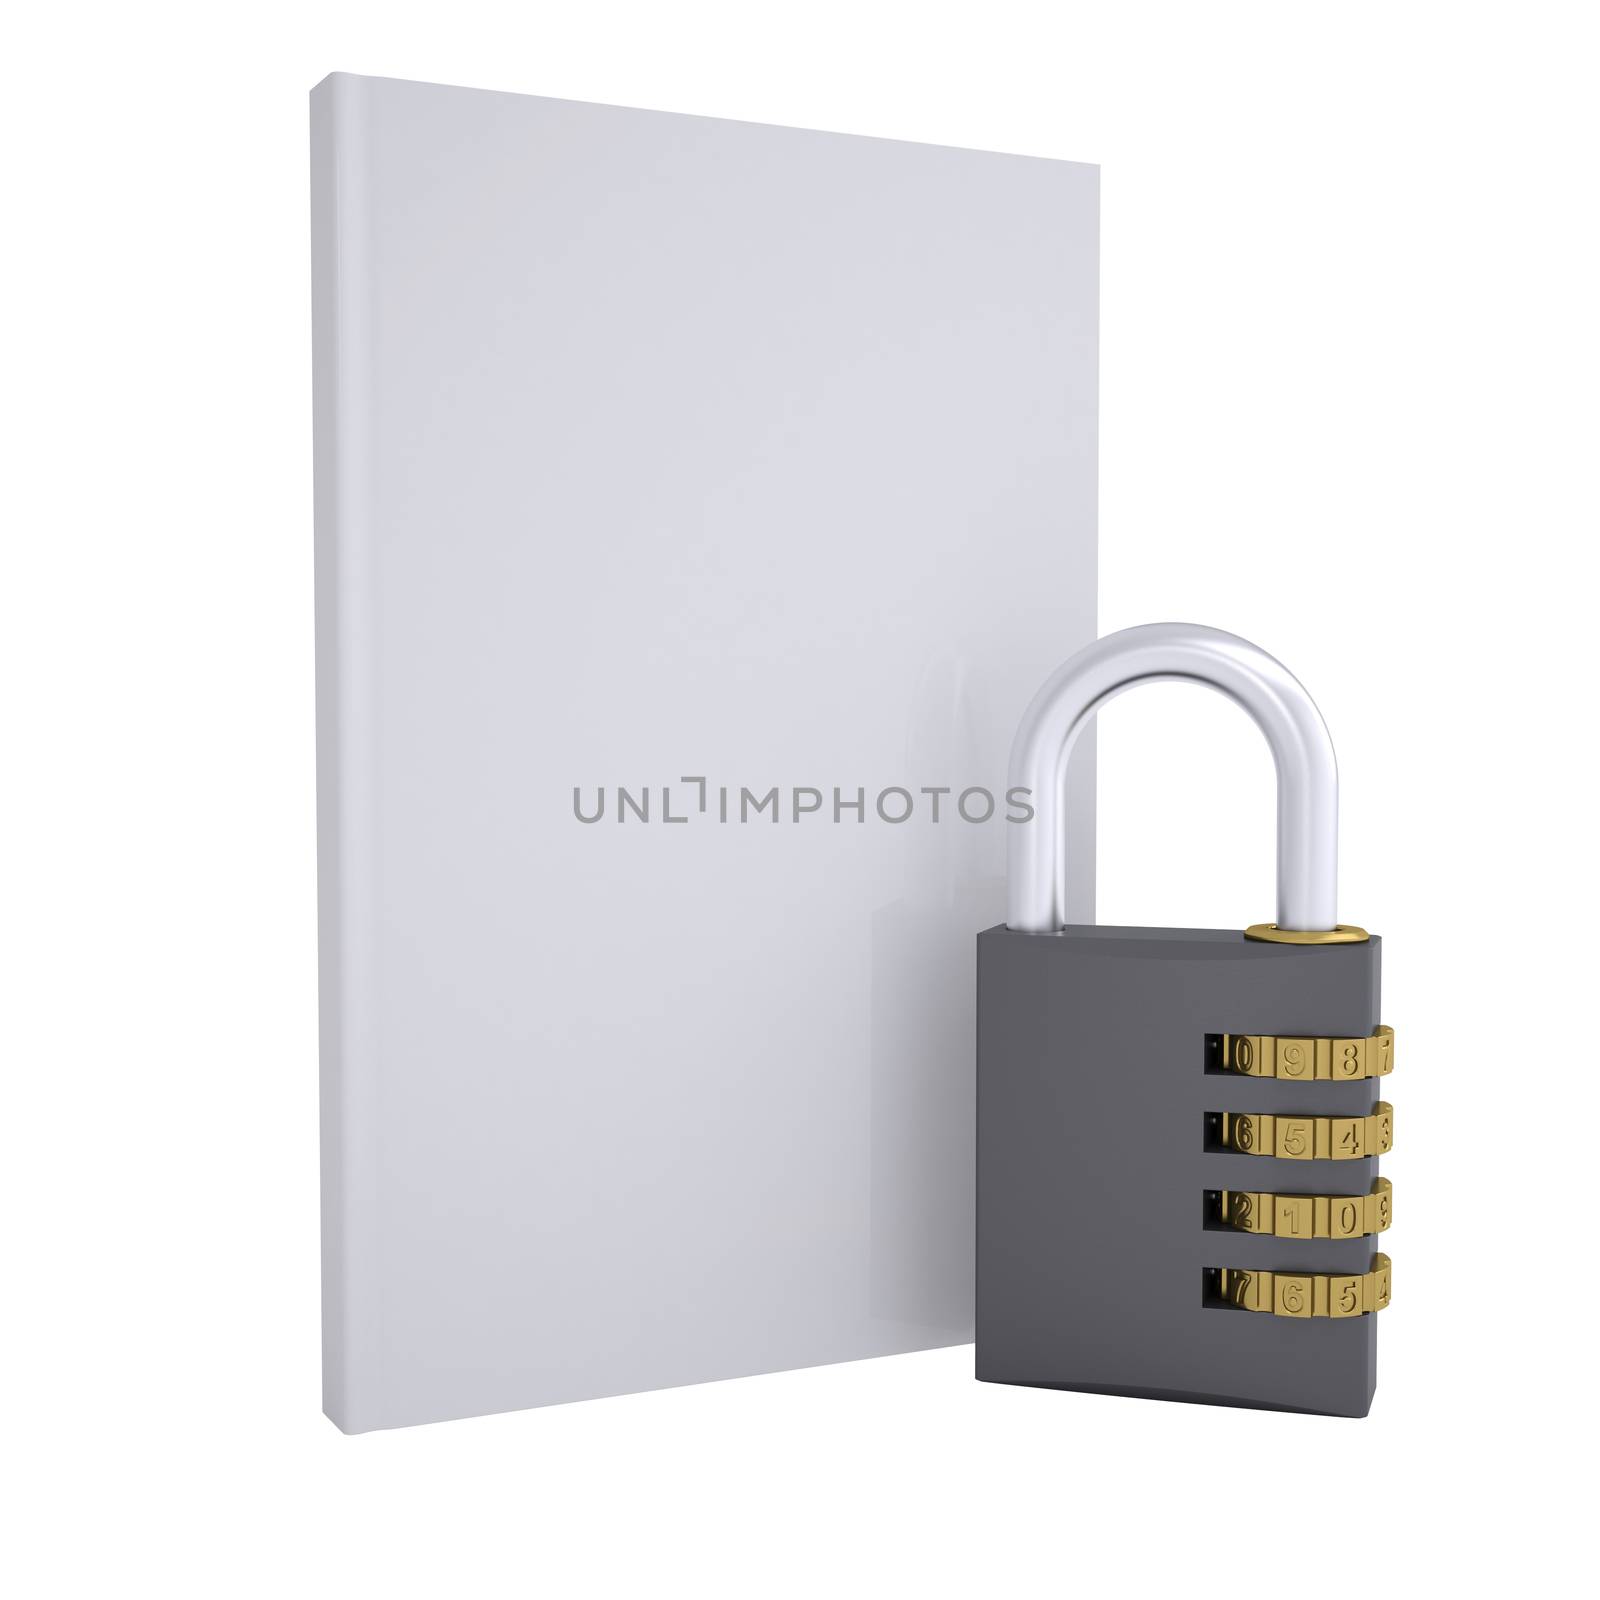 Combination lock and white book by cherezoff